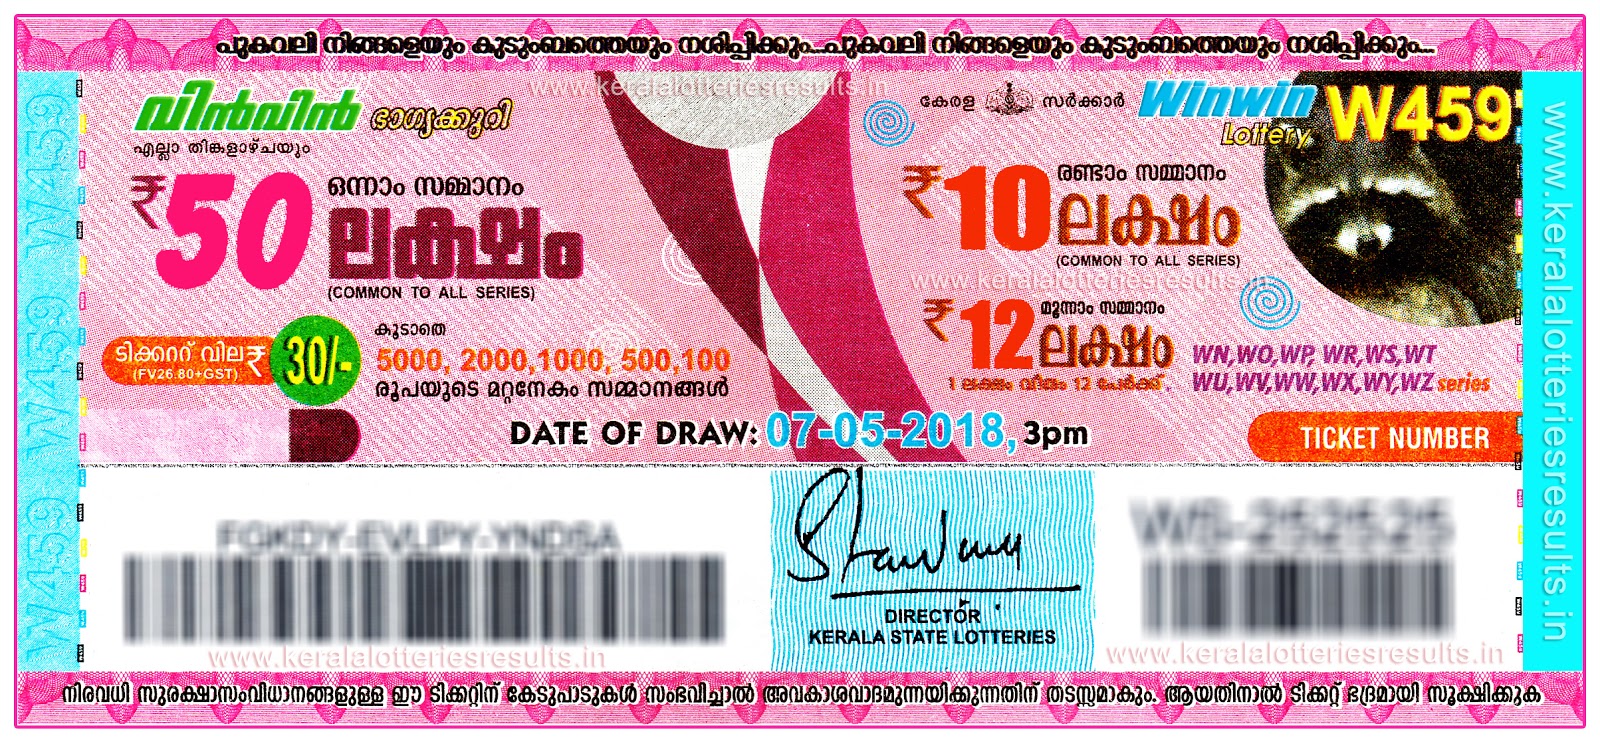 G tickets. Lottery ticket 1000$. Win the Lottery. Lottery ticket Design. Egypt Lottery ticket.